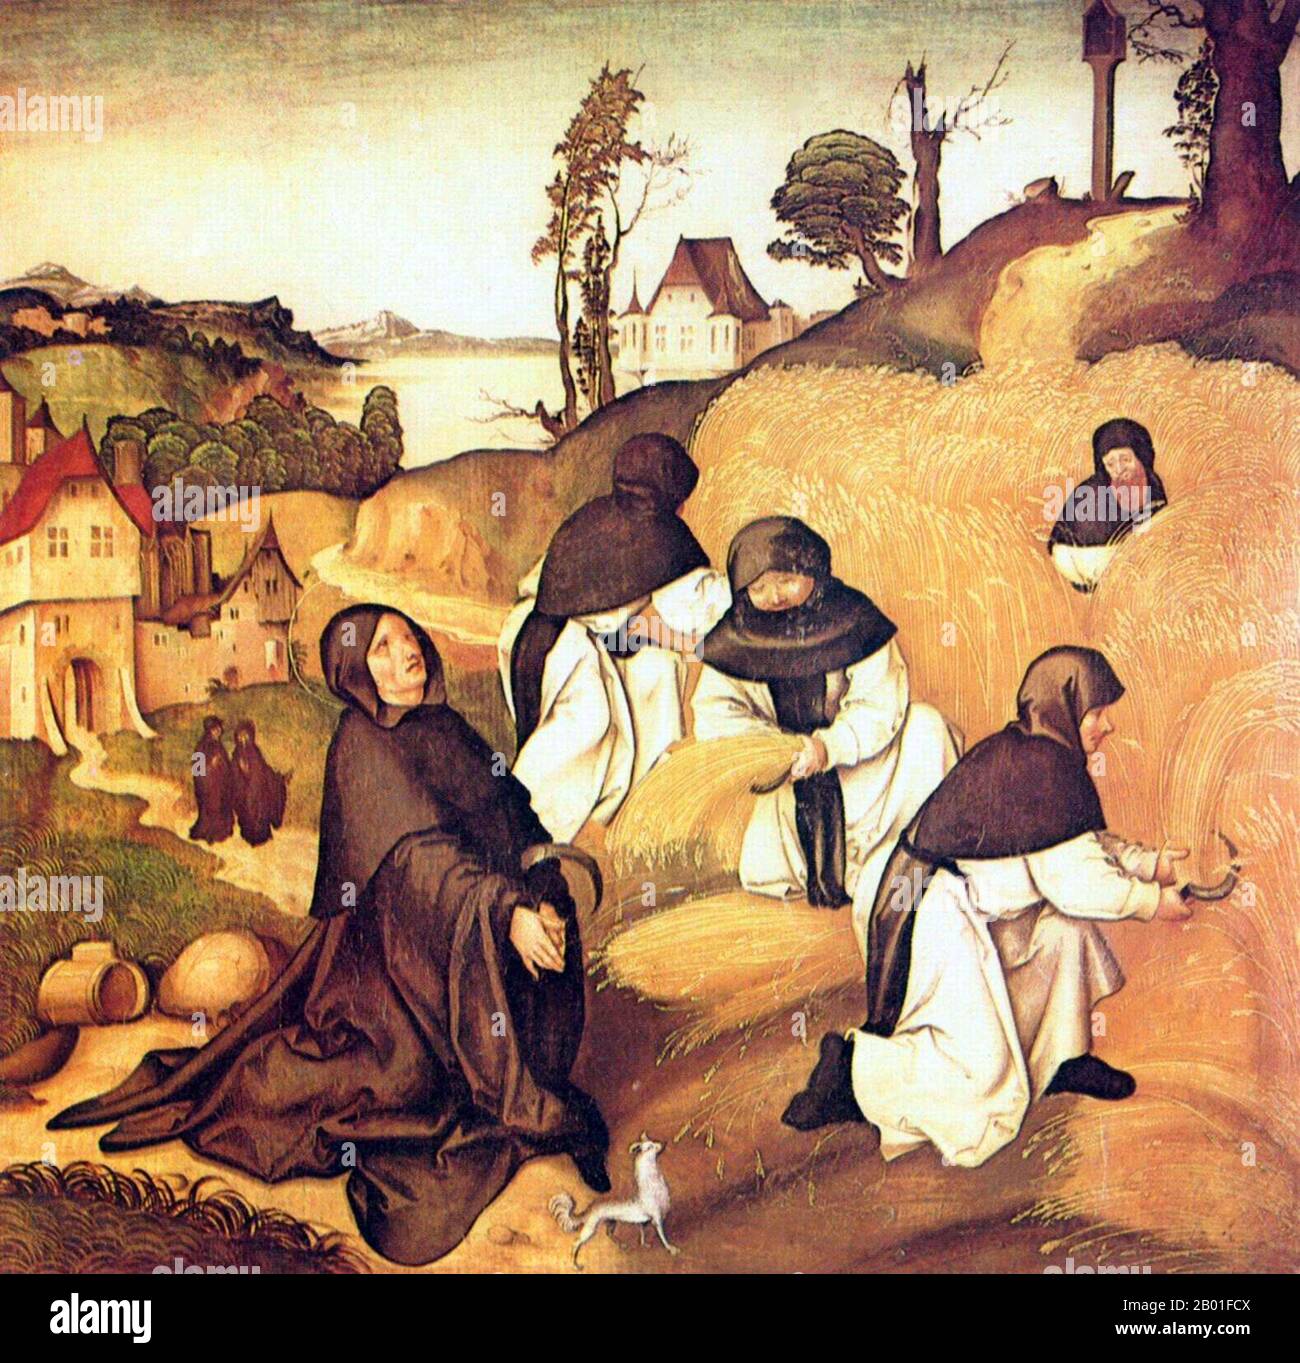 Germany: Cistercian monks working in a cornfield. Painting by Jörg Breu the Elder (c. 1475-1537), 1500.  The Order of Cistercians (Latin: Ordo Cisterciensis or, alternatively, O.C.S.O. for the Trappists [Order of Cistercians of the Strict Observance]) is a Catholic religious order of enclosed monks and nuns. They are sometimes also called the Bernardines or the White Monks, in reference to the colour of the habit, over which a black scapular is worn.  The emphasis of Cistercian life is on manual labour and self-sufficiency. Stock Photo